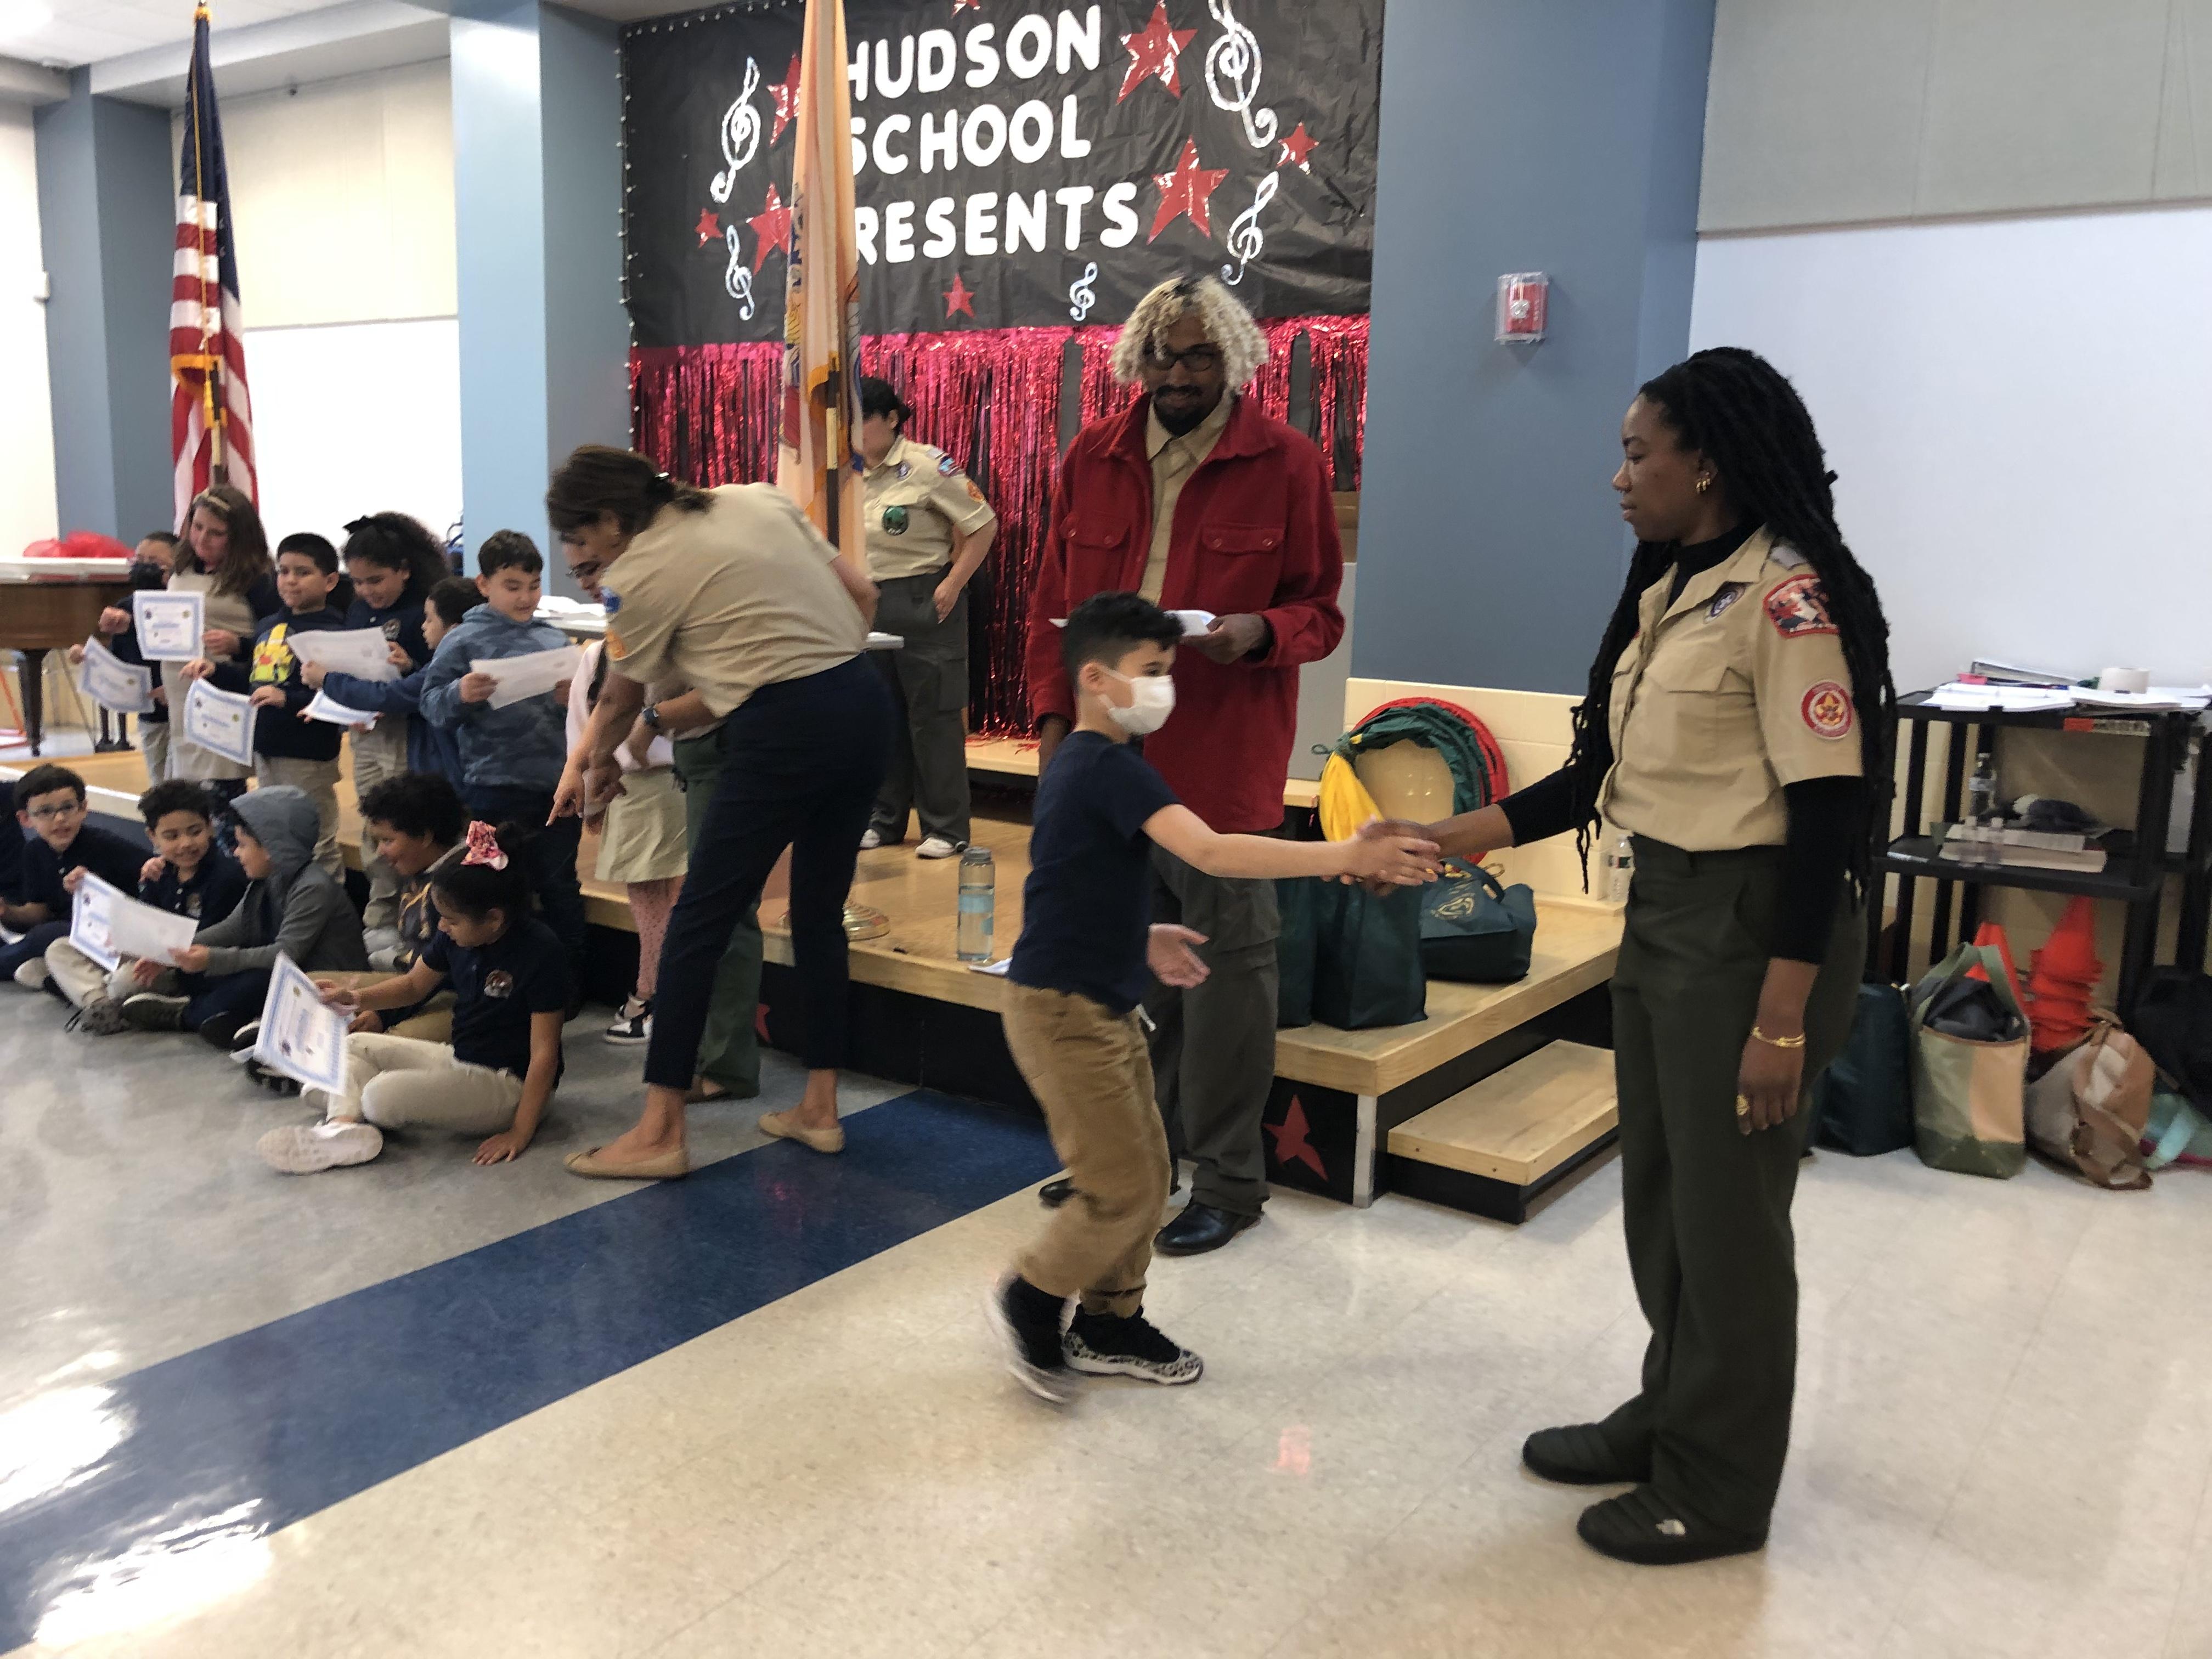 Cub Scouts Ceremony at Hudson School #1